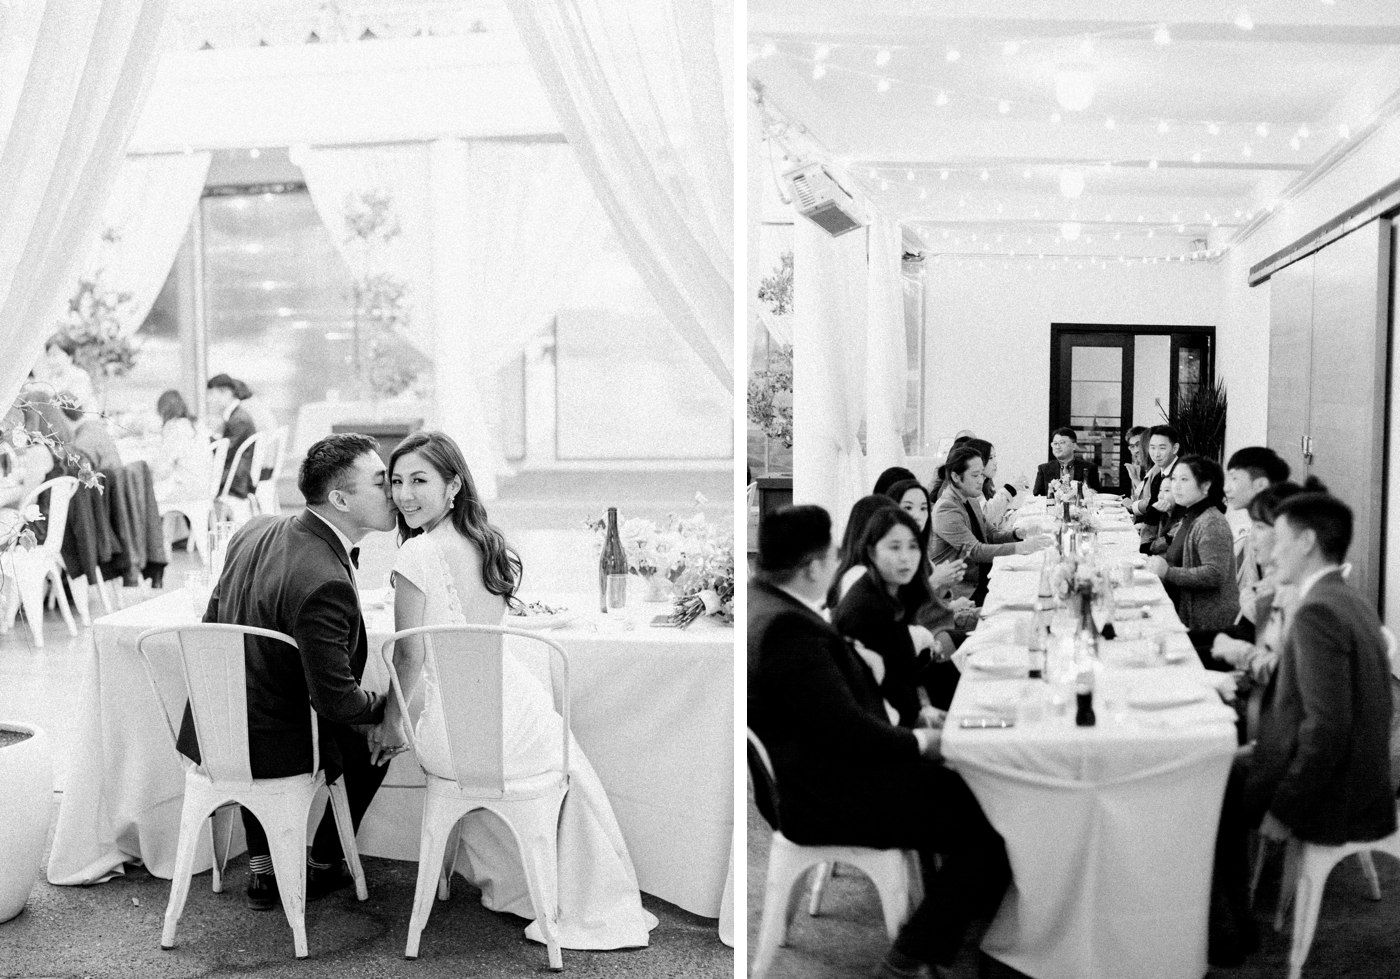 Cafe lights and white table linens for a summer wedding reception